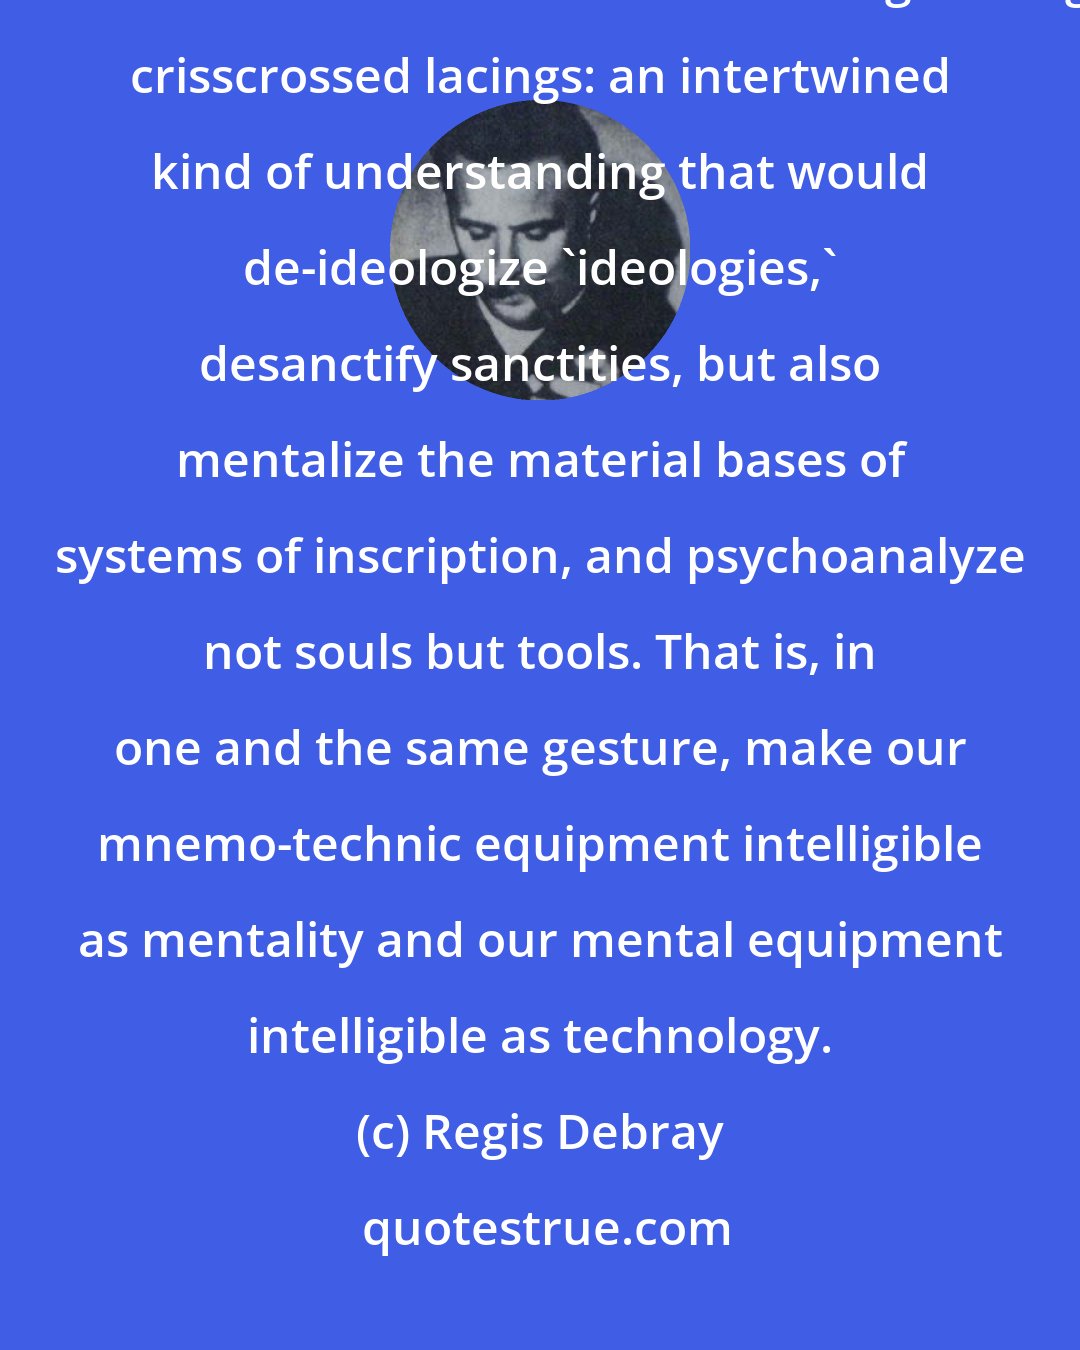 Regis Debray: Truly, more than removing the partition between vectors and values, we would have needed to talk about strengthening crisscrossed lacings: an intertwined kind of understanding that would de-ideologize 'ideologies,' desanctify sanctities, but also mentalize the material bases of systems of inscription, and psychoanalyze not souls but tools. That is, in one and the same gesture, make our mnemo-technic equipment intelligible as mentality and our mental equipment intelligible as technology.